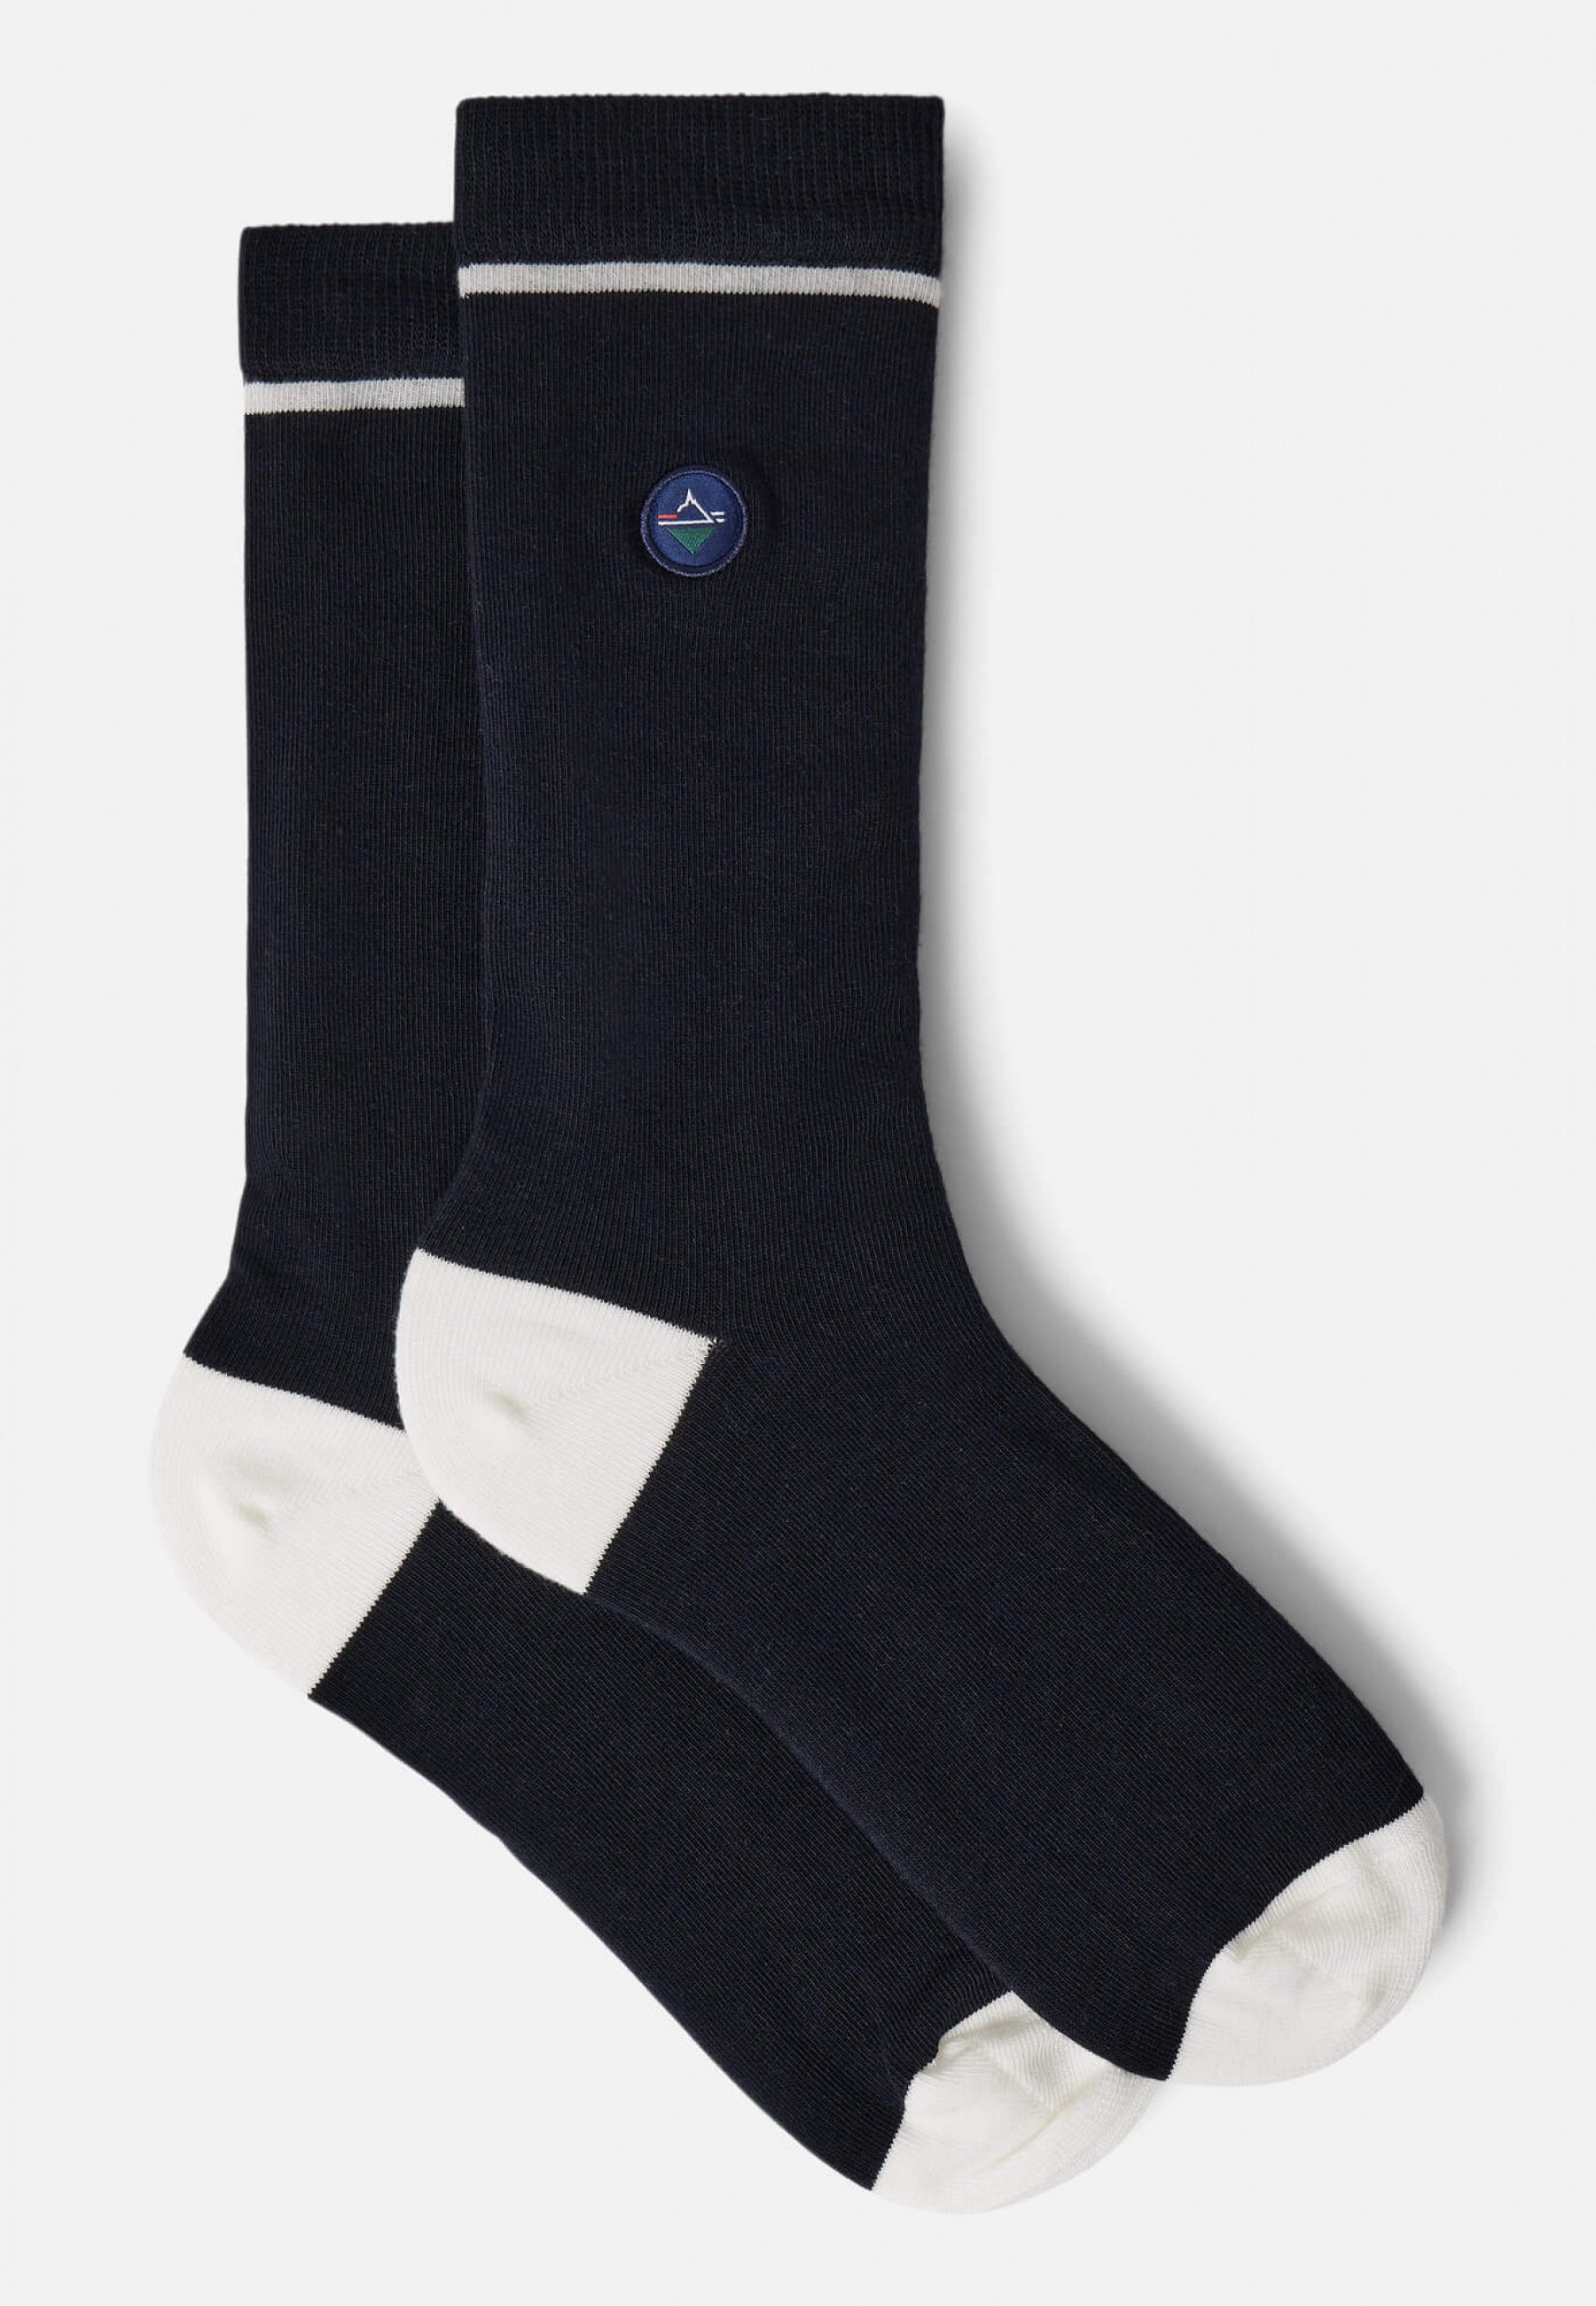 Chaussettes brodées homme MONTLISOCKS marine made in France en coton bio